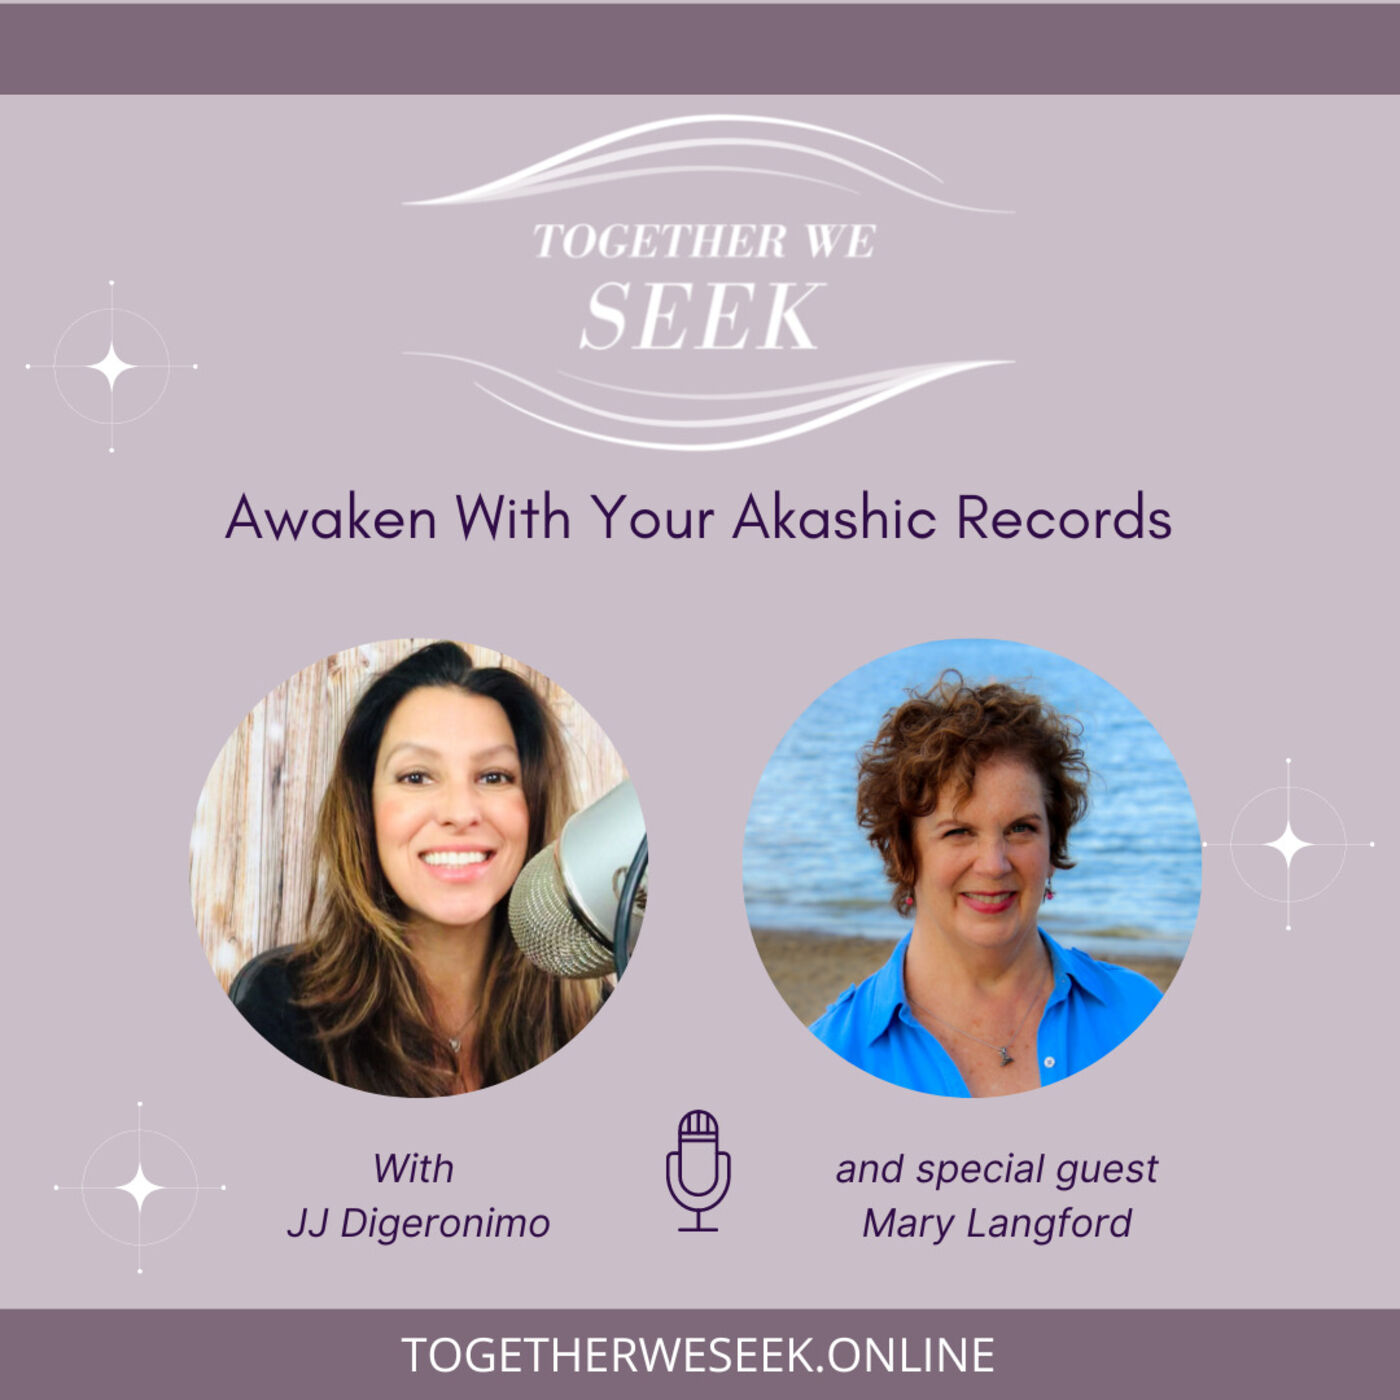 Awaken With Your Akashic Records with Mary Langford